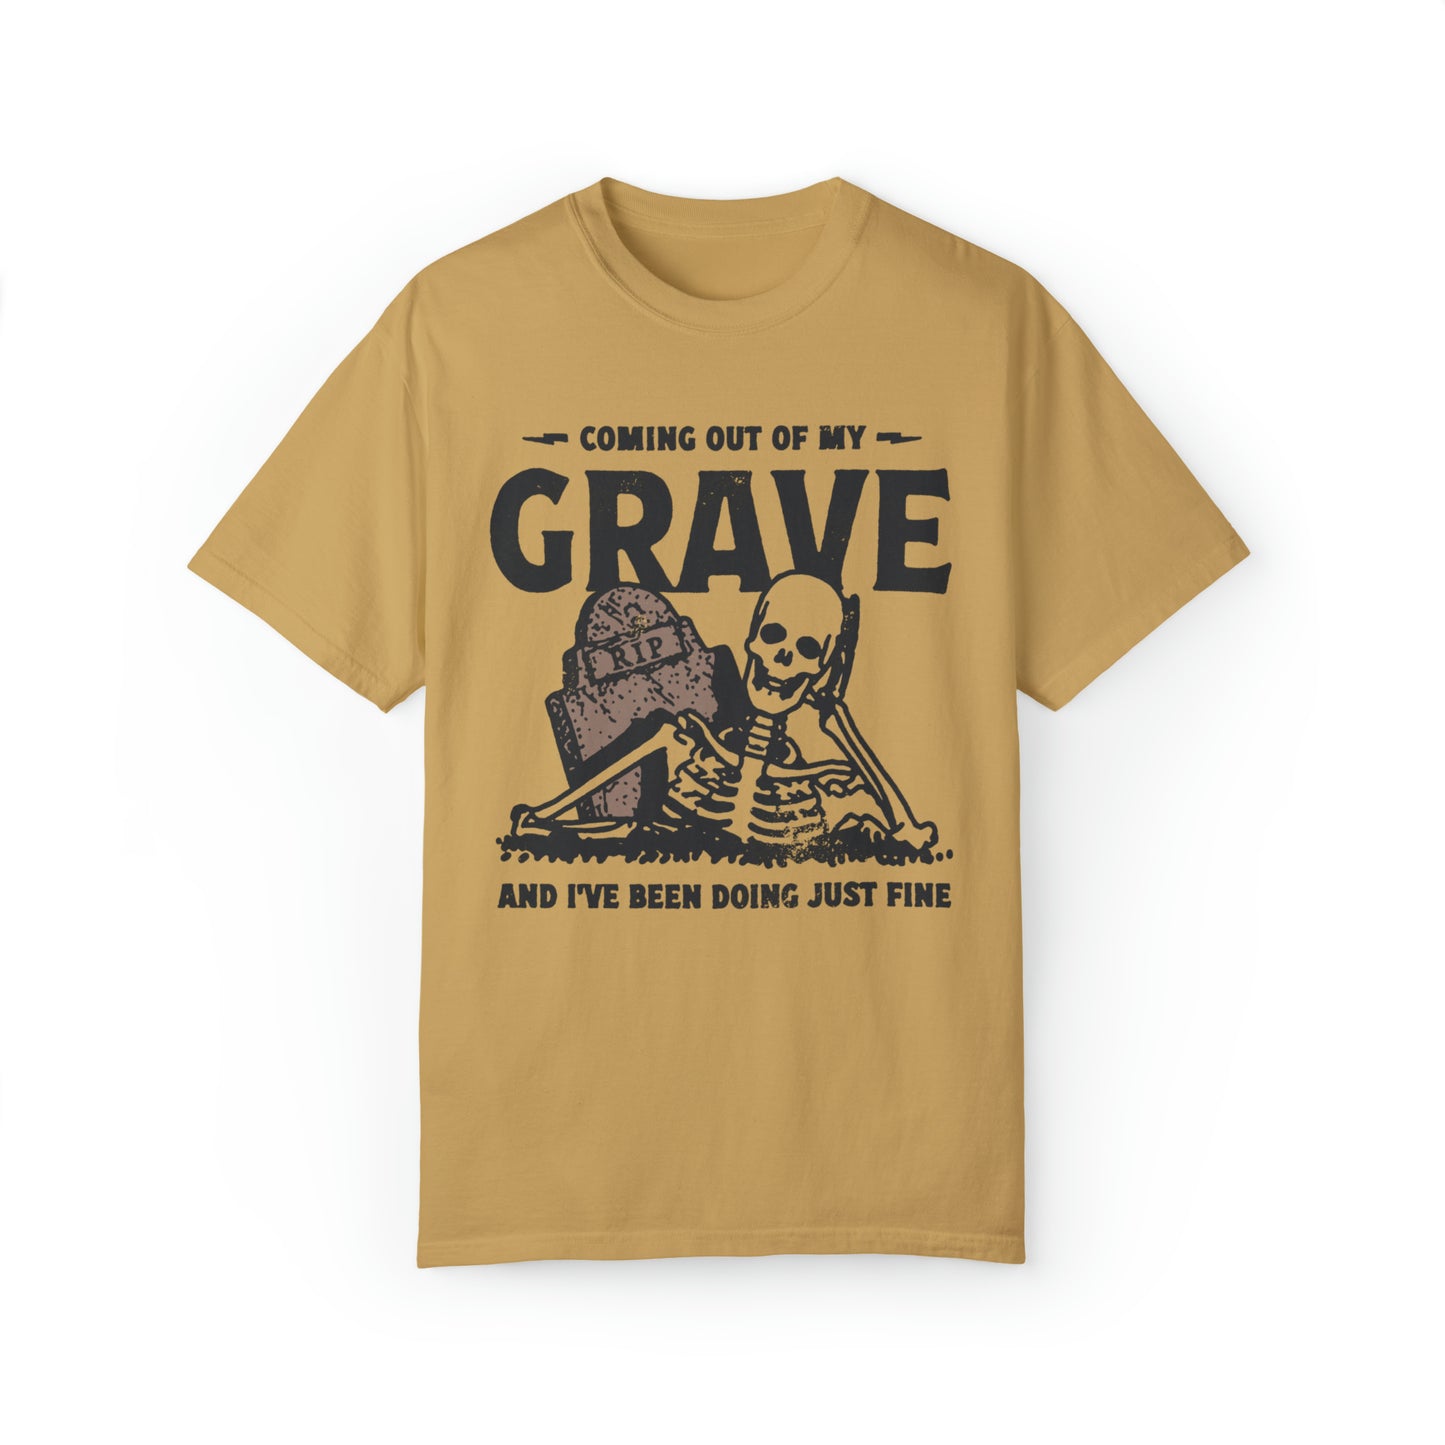 Coming Out Of My Grave Shirt